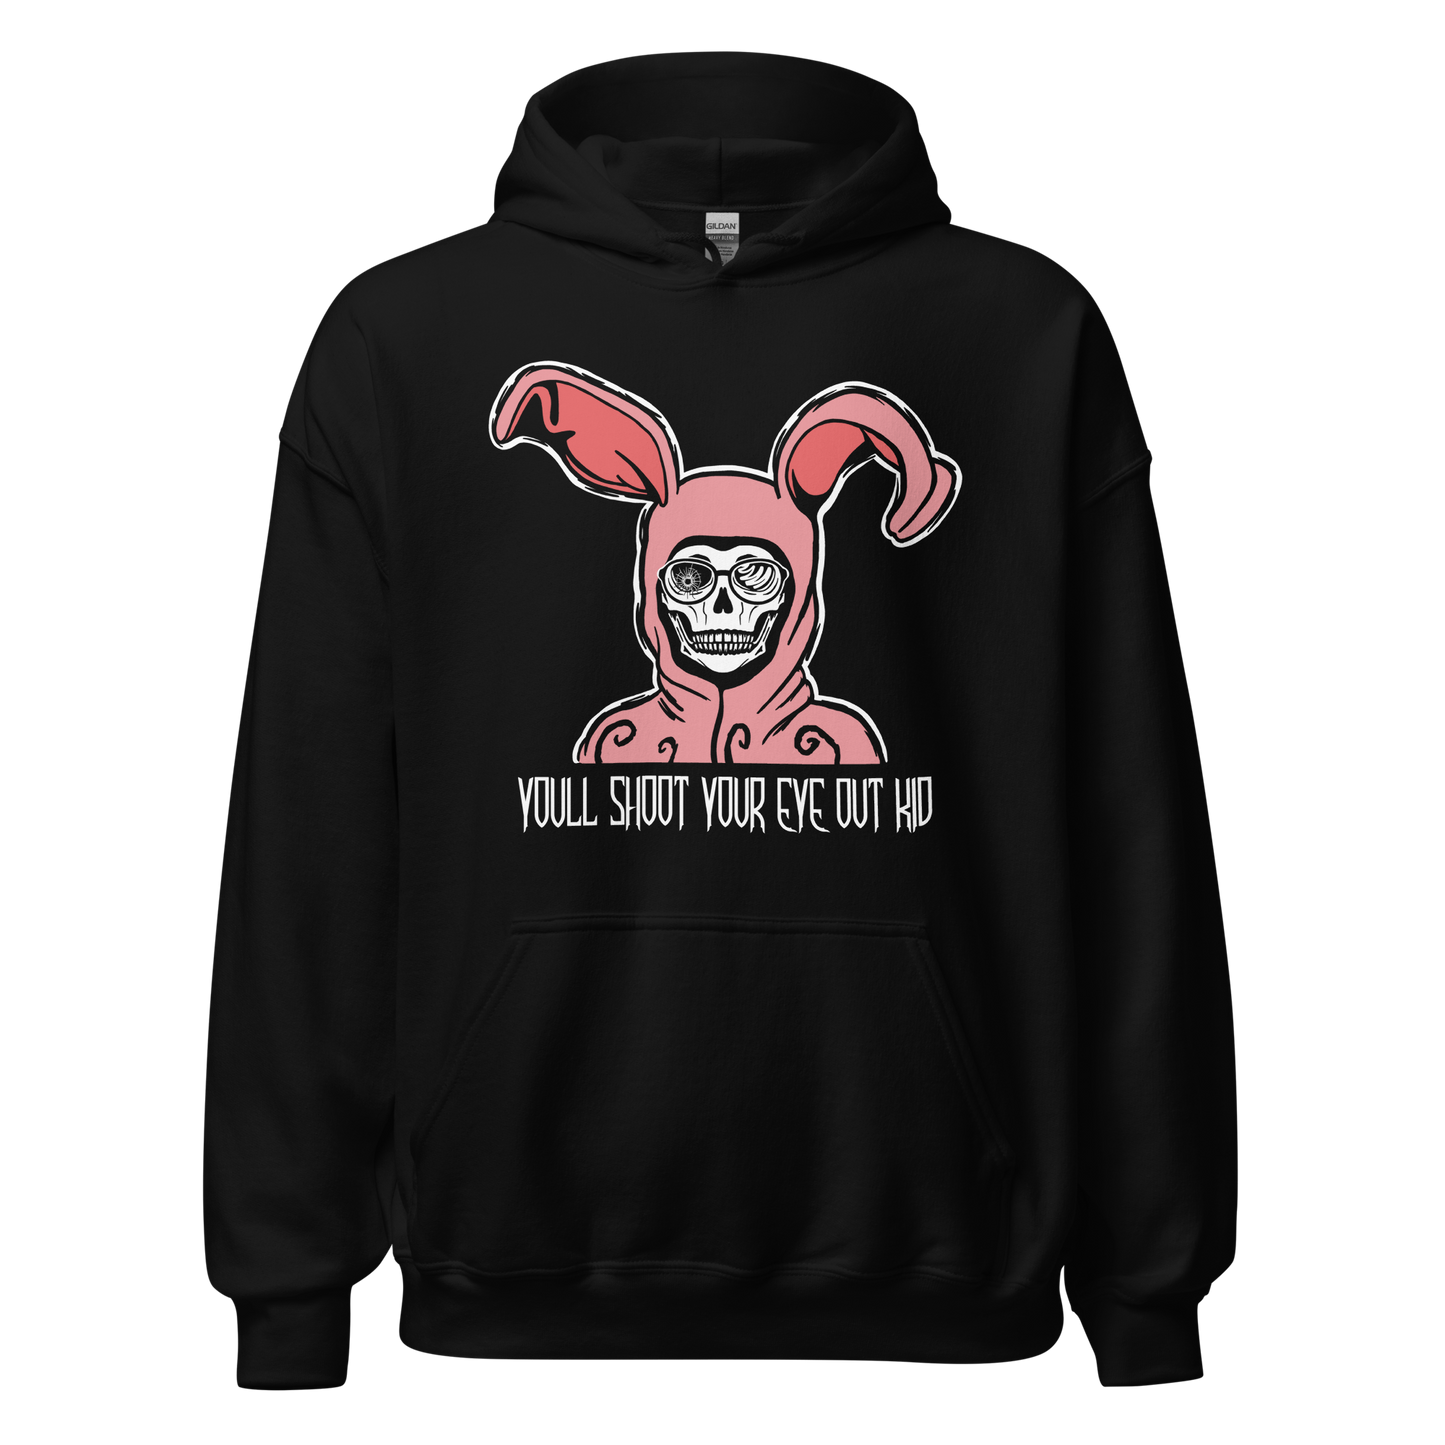 YOU'LL SHOOT YOUR EYE OUT KID Hoodie